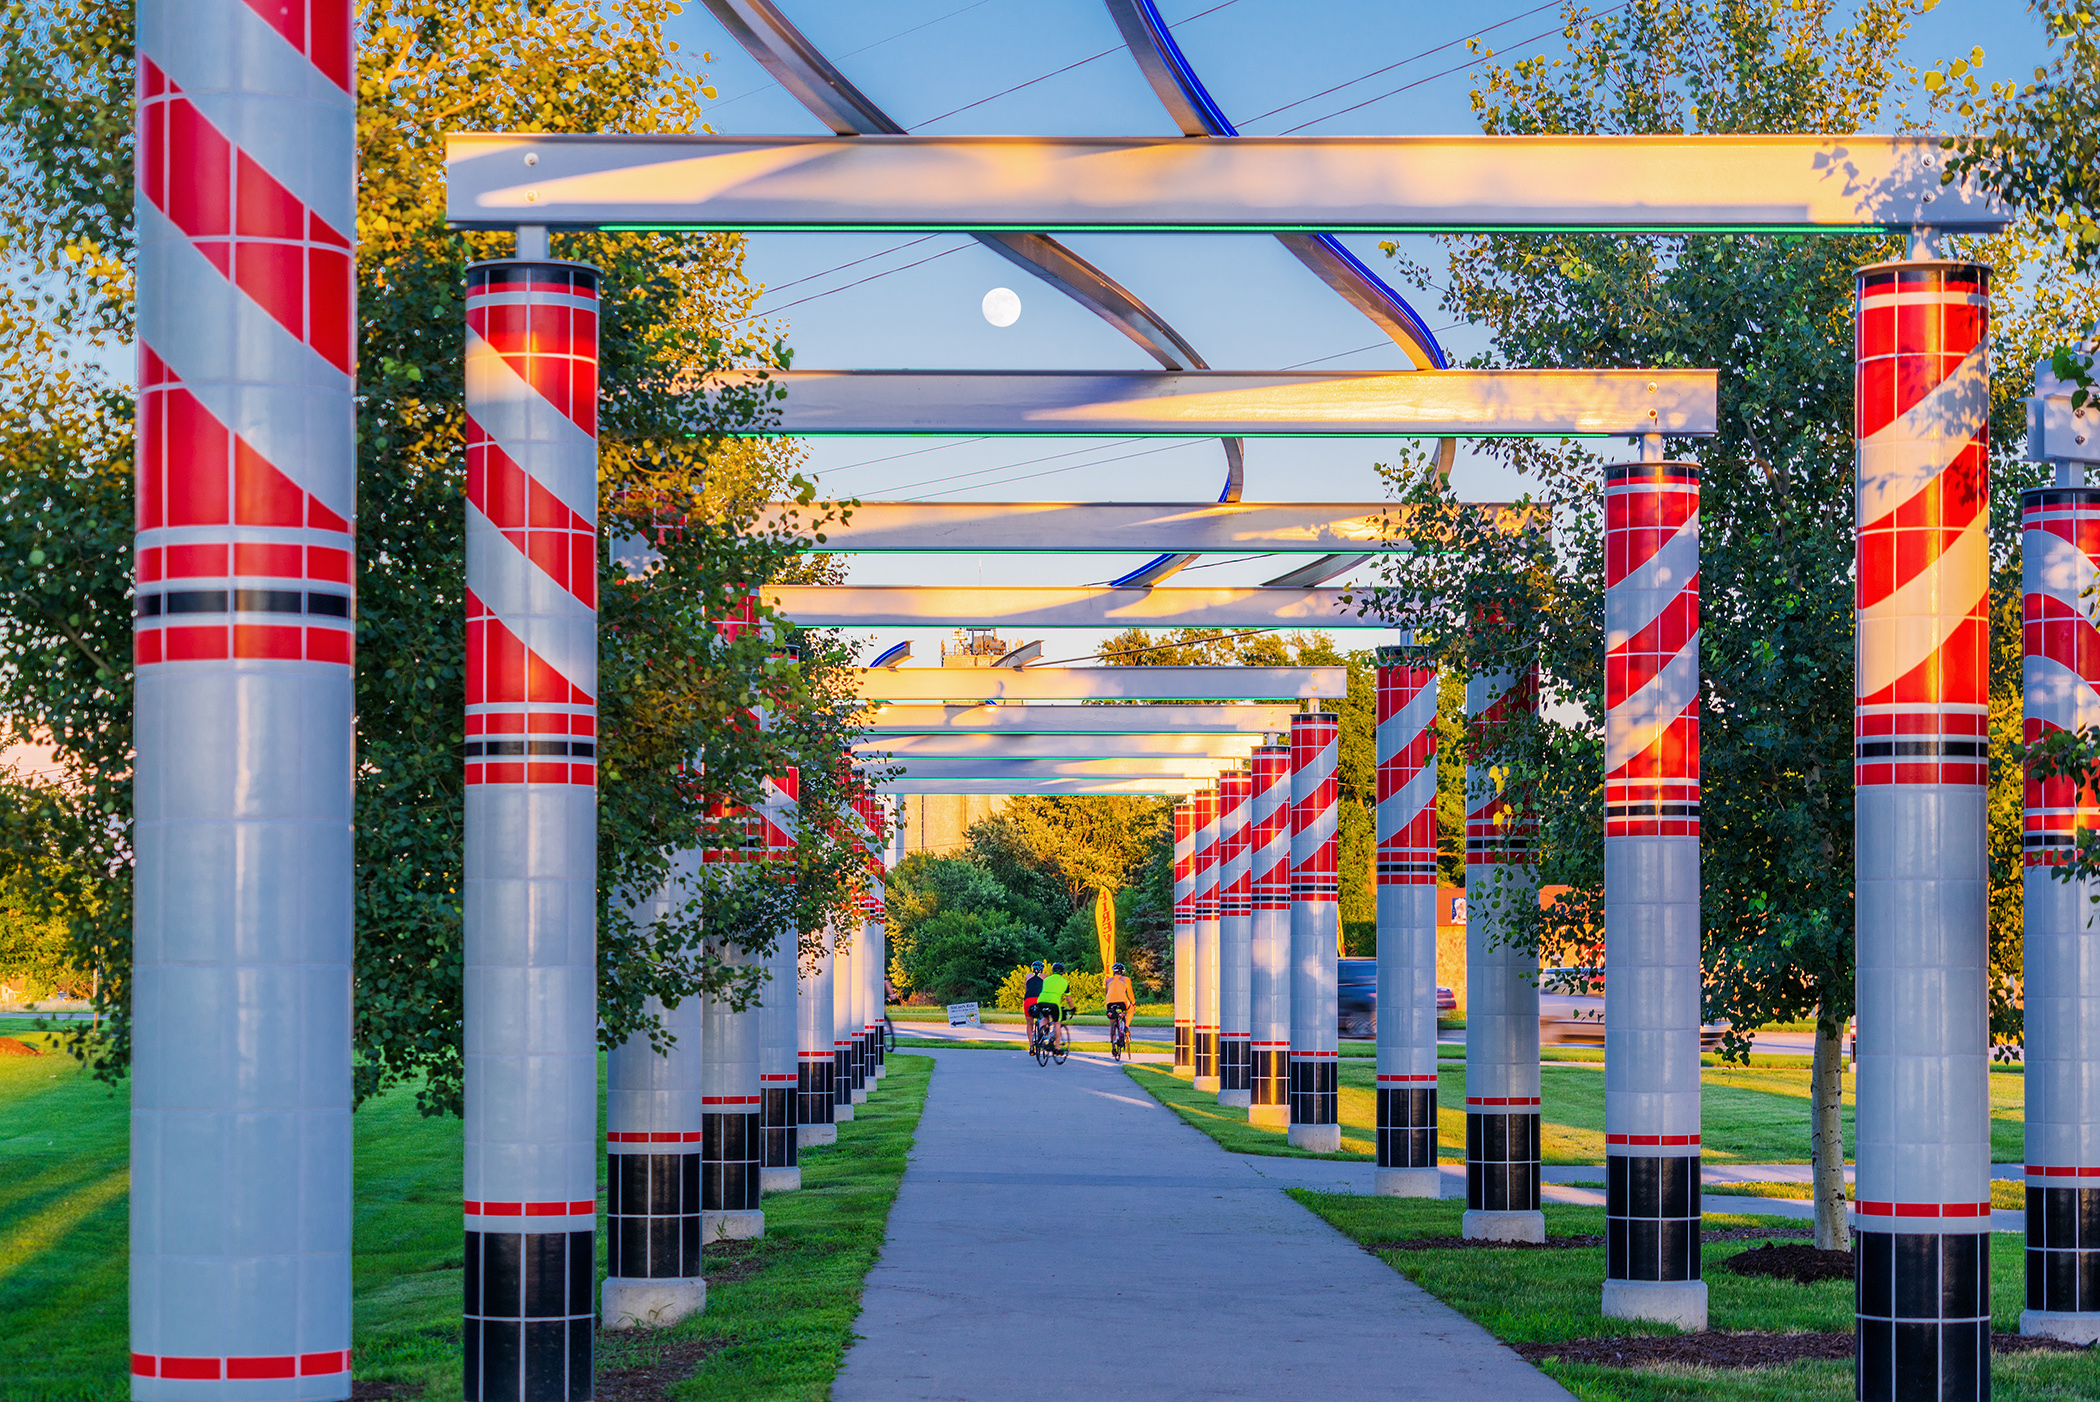 Waukee Railroad Pergola: In the Shadow of the Rails